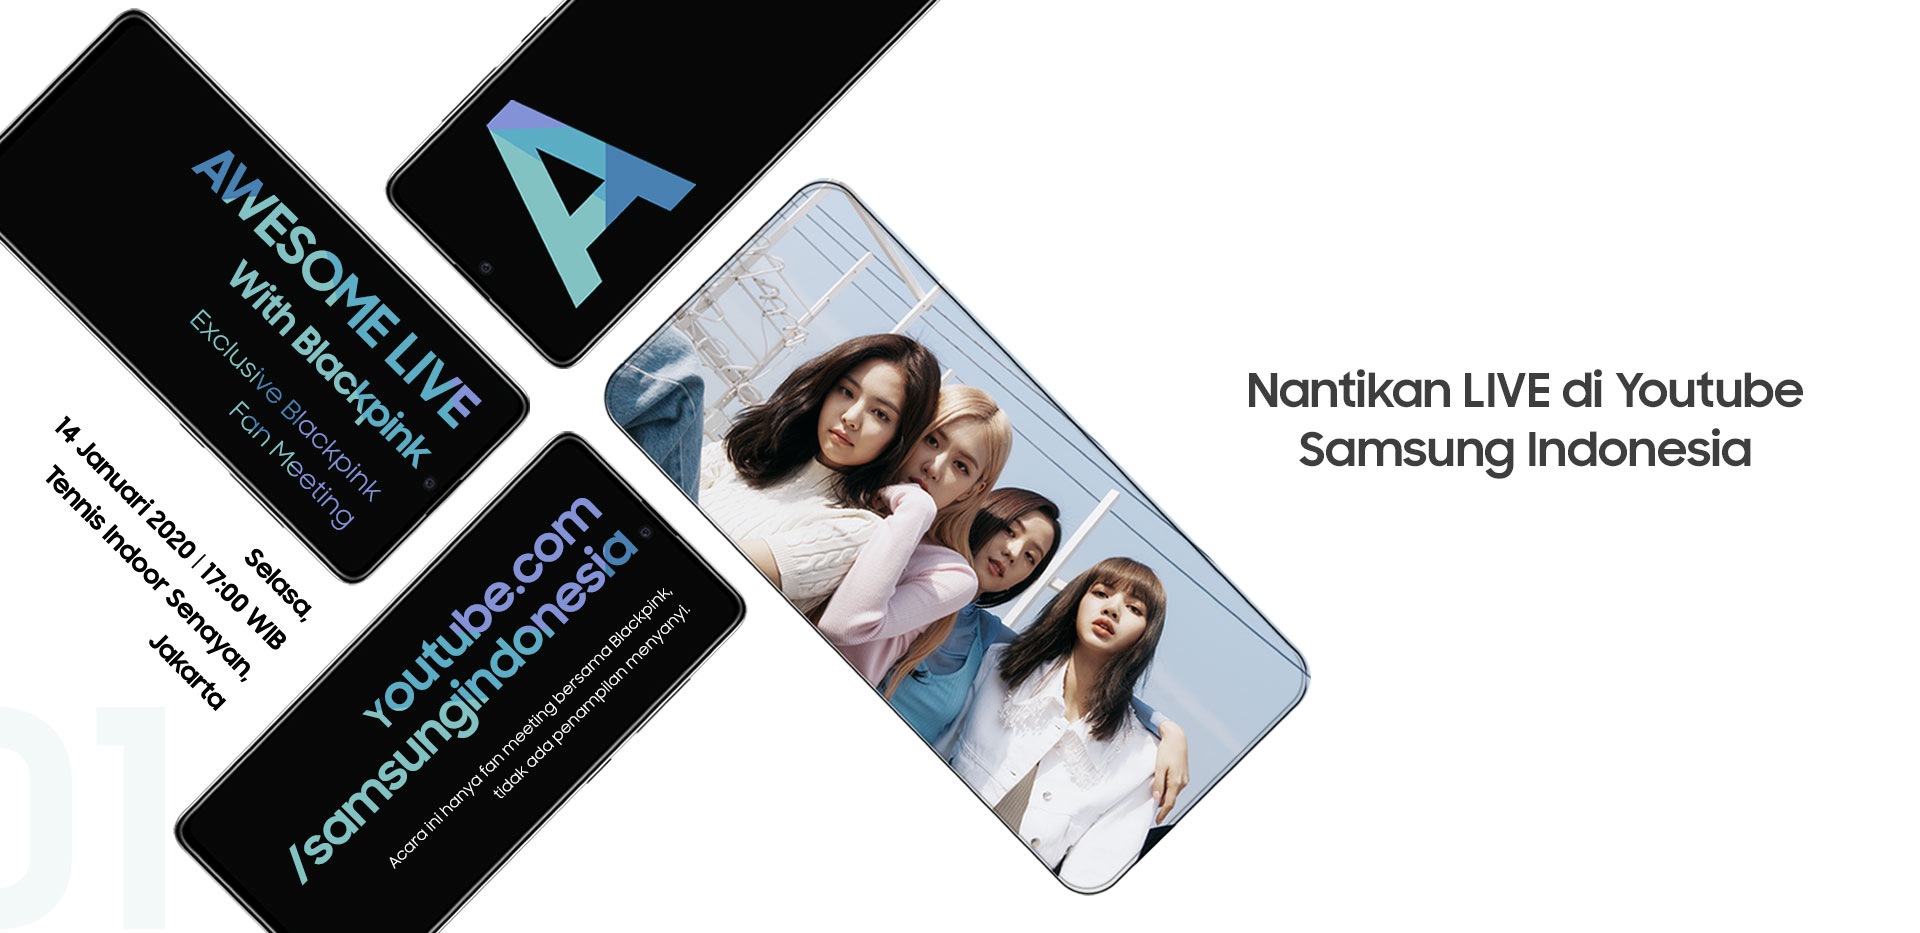 GALAXY A BLACKPINK CAMPAIGN (AWESOME LIVE) | Samsung Indonesia